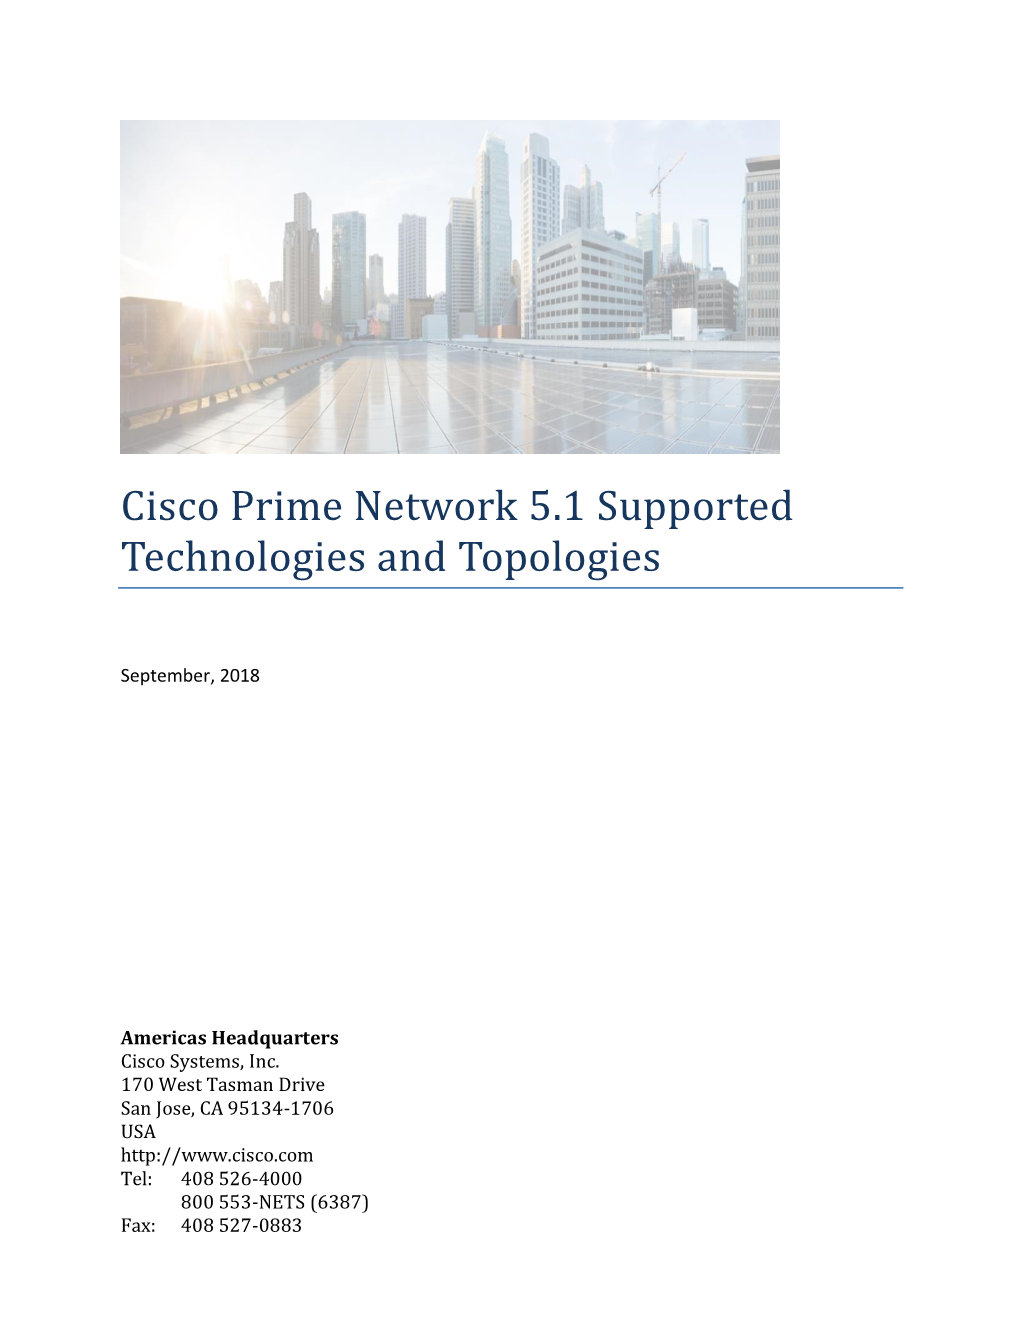 Cisco Prime Network Supported Technologies and Topologies